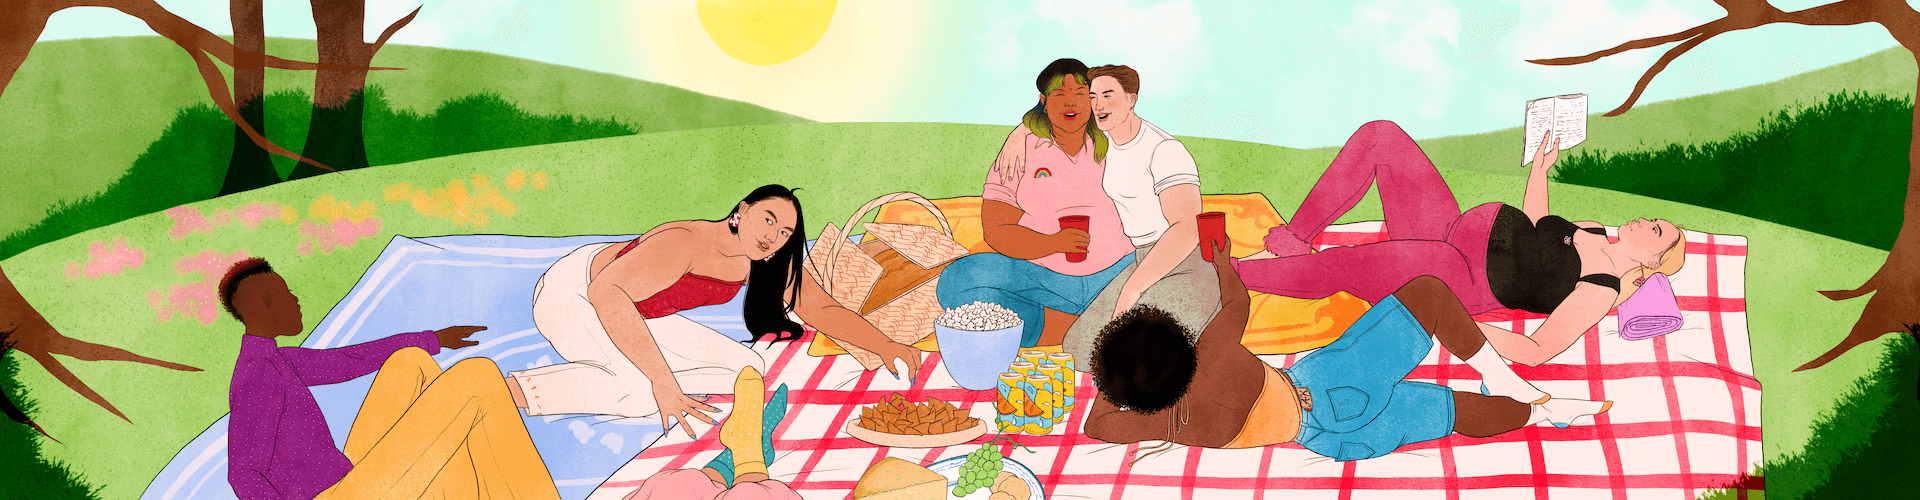 An illustration of a group of LGBTQ+ young people outside in a park, having a picnic together. The group are thinking about the future and discussing their next steps.  